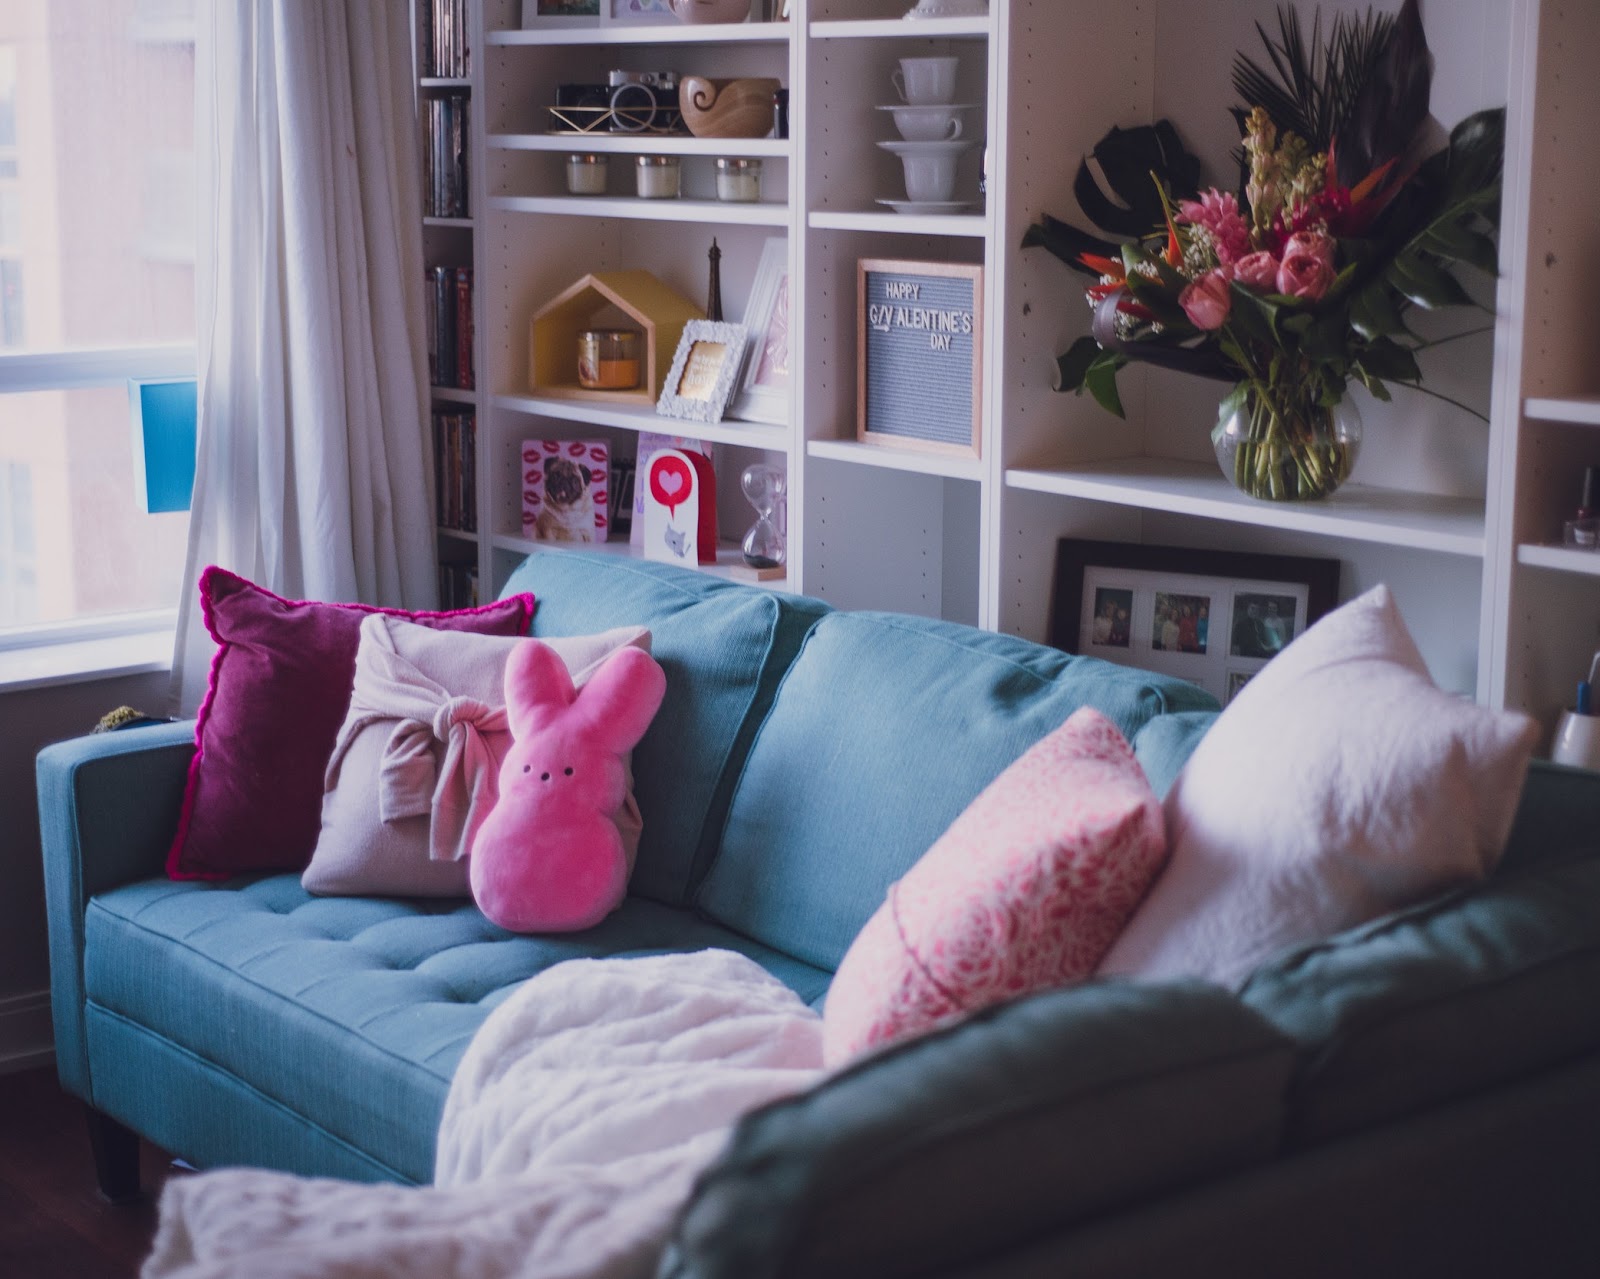 lily-muffins-valentine-living-room-ideas